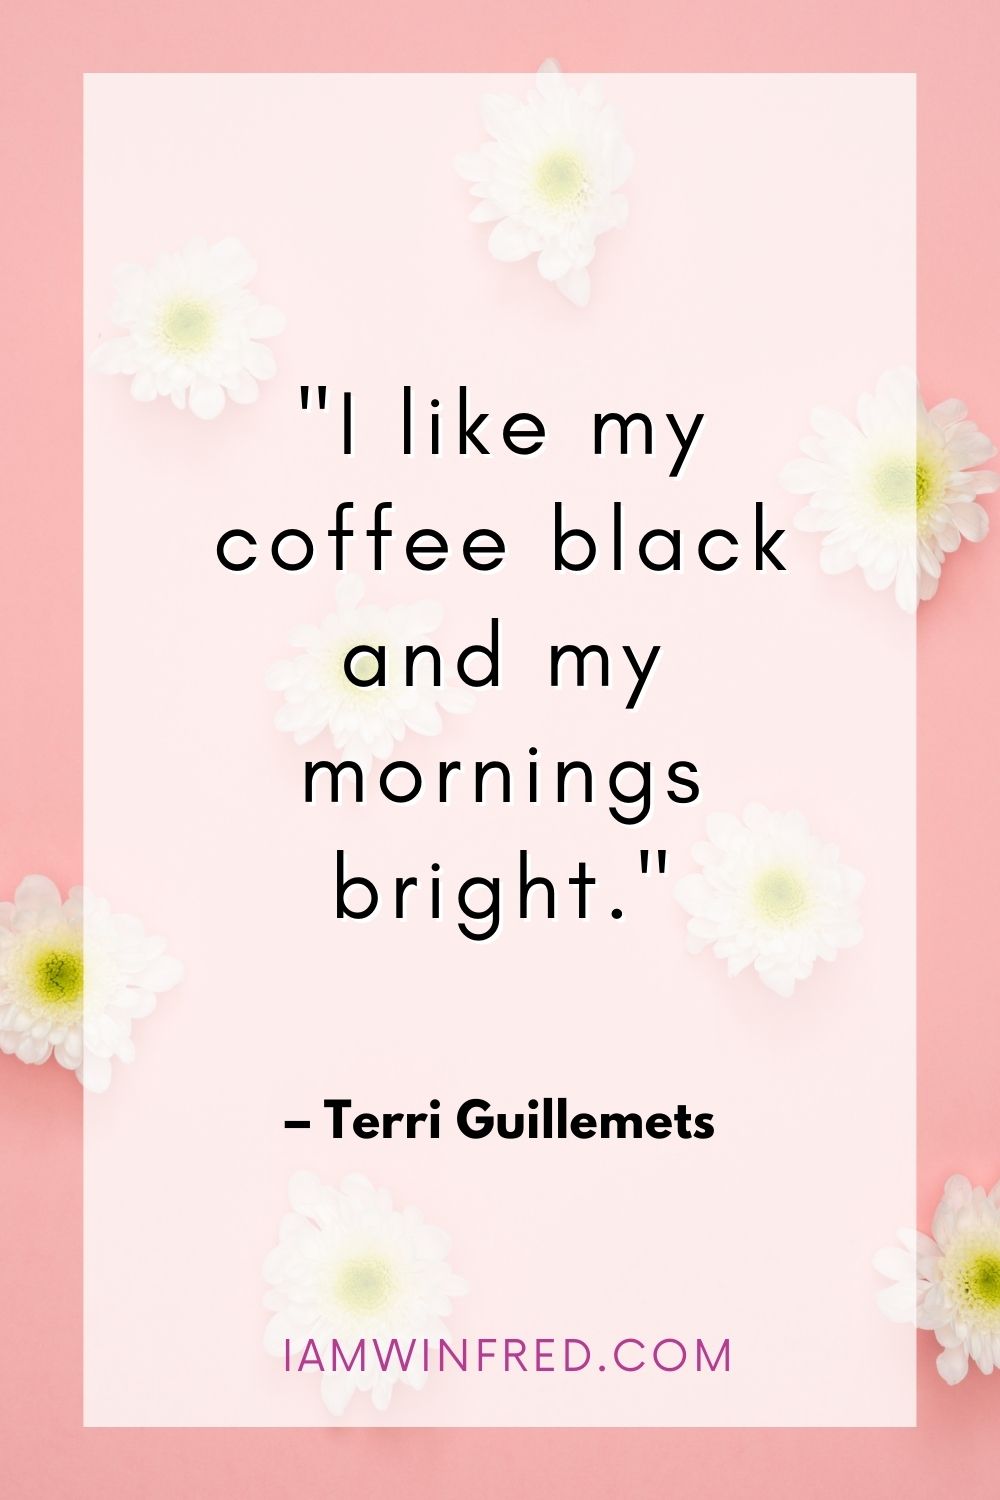 I Like My Coffee Black And My Mornings Bright.